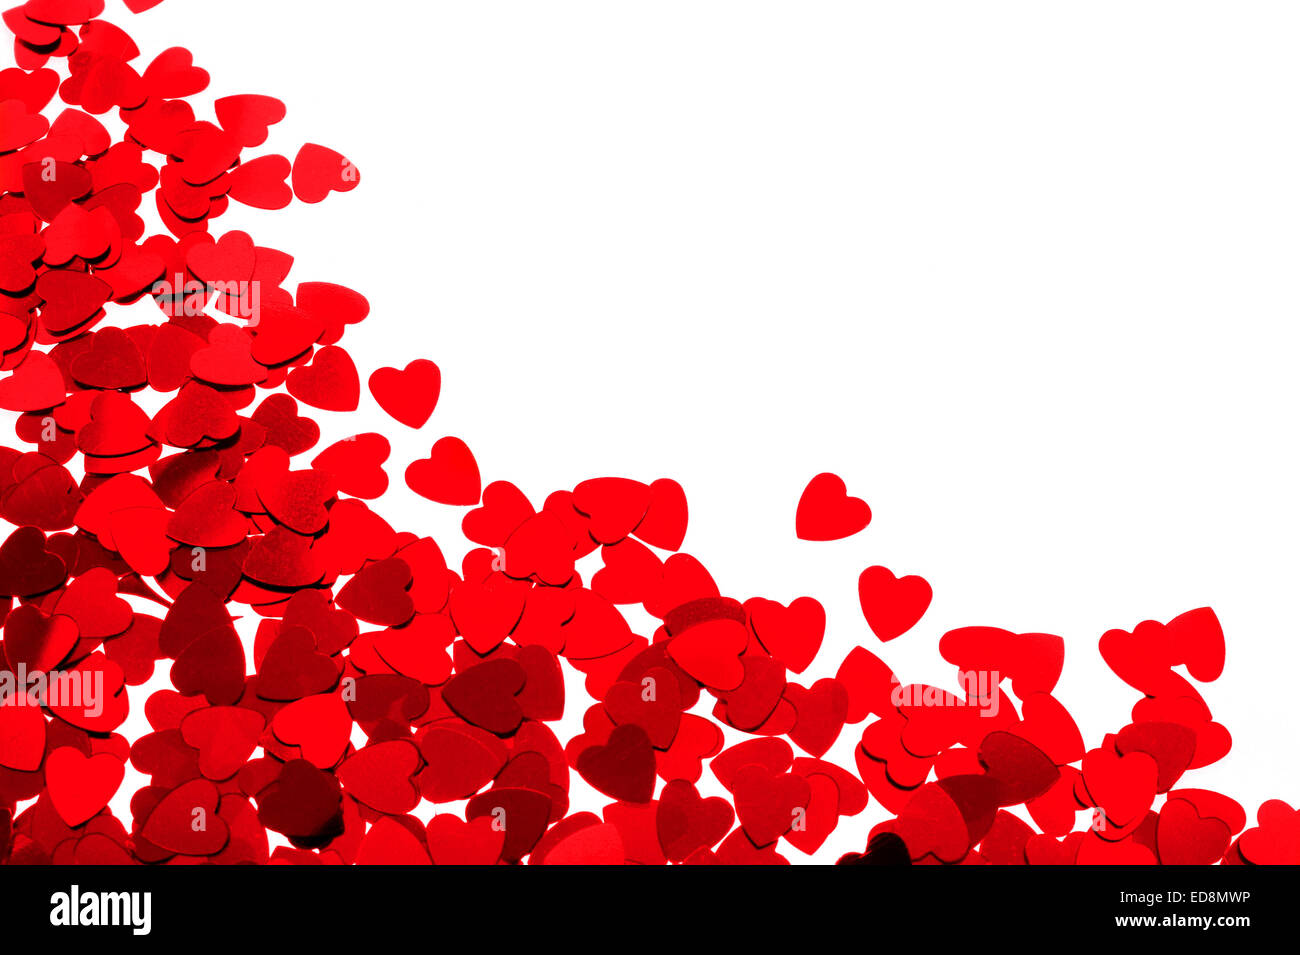 42,100+ Heart Confetti Stock Photos, Pictures & Royalty-Free